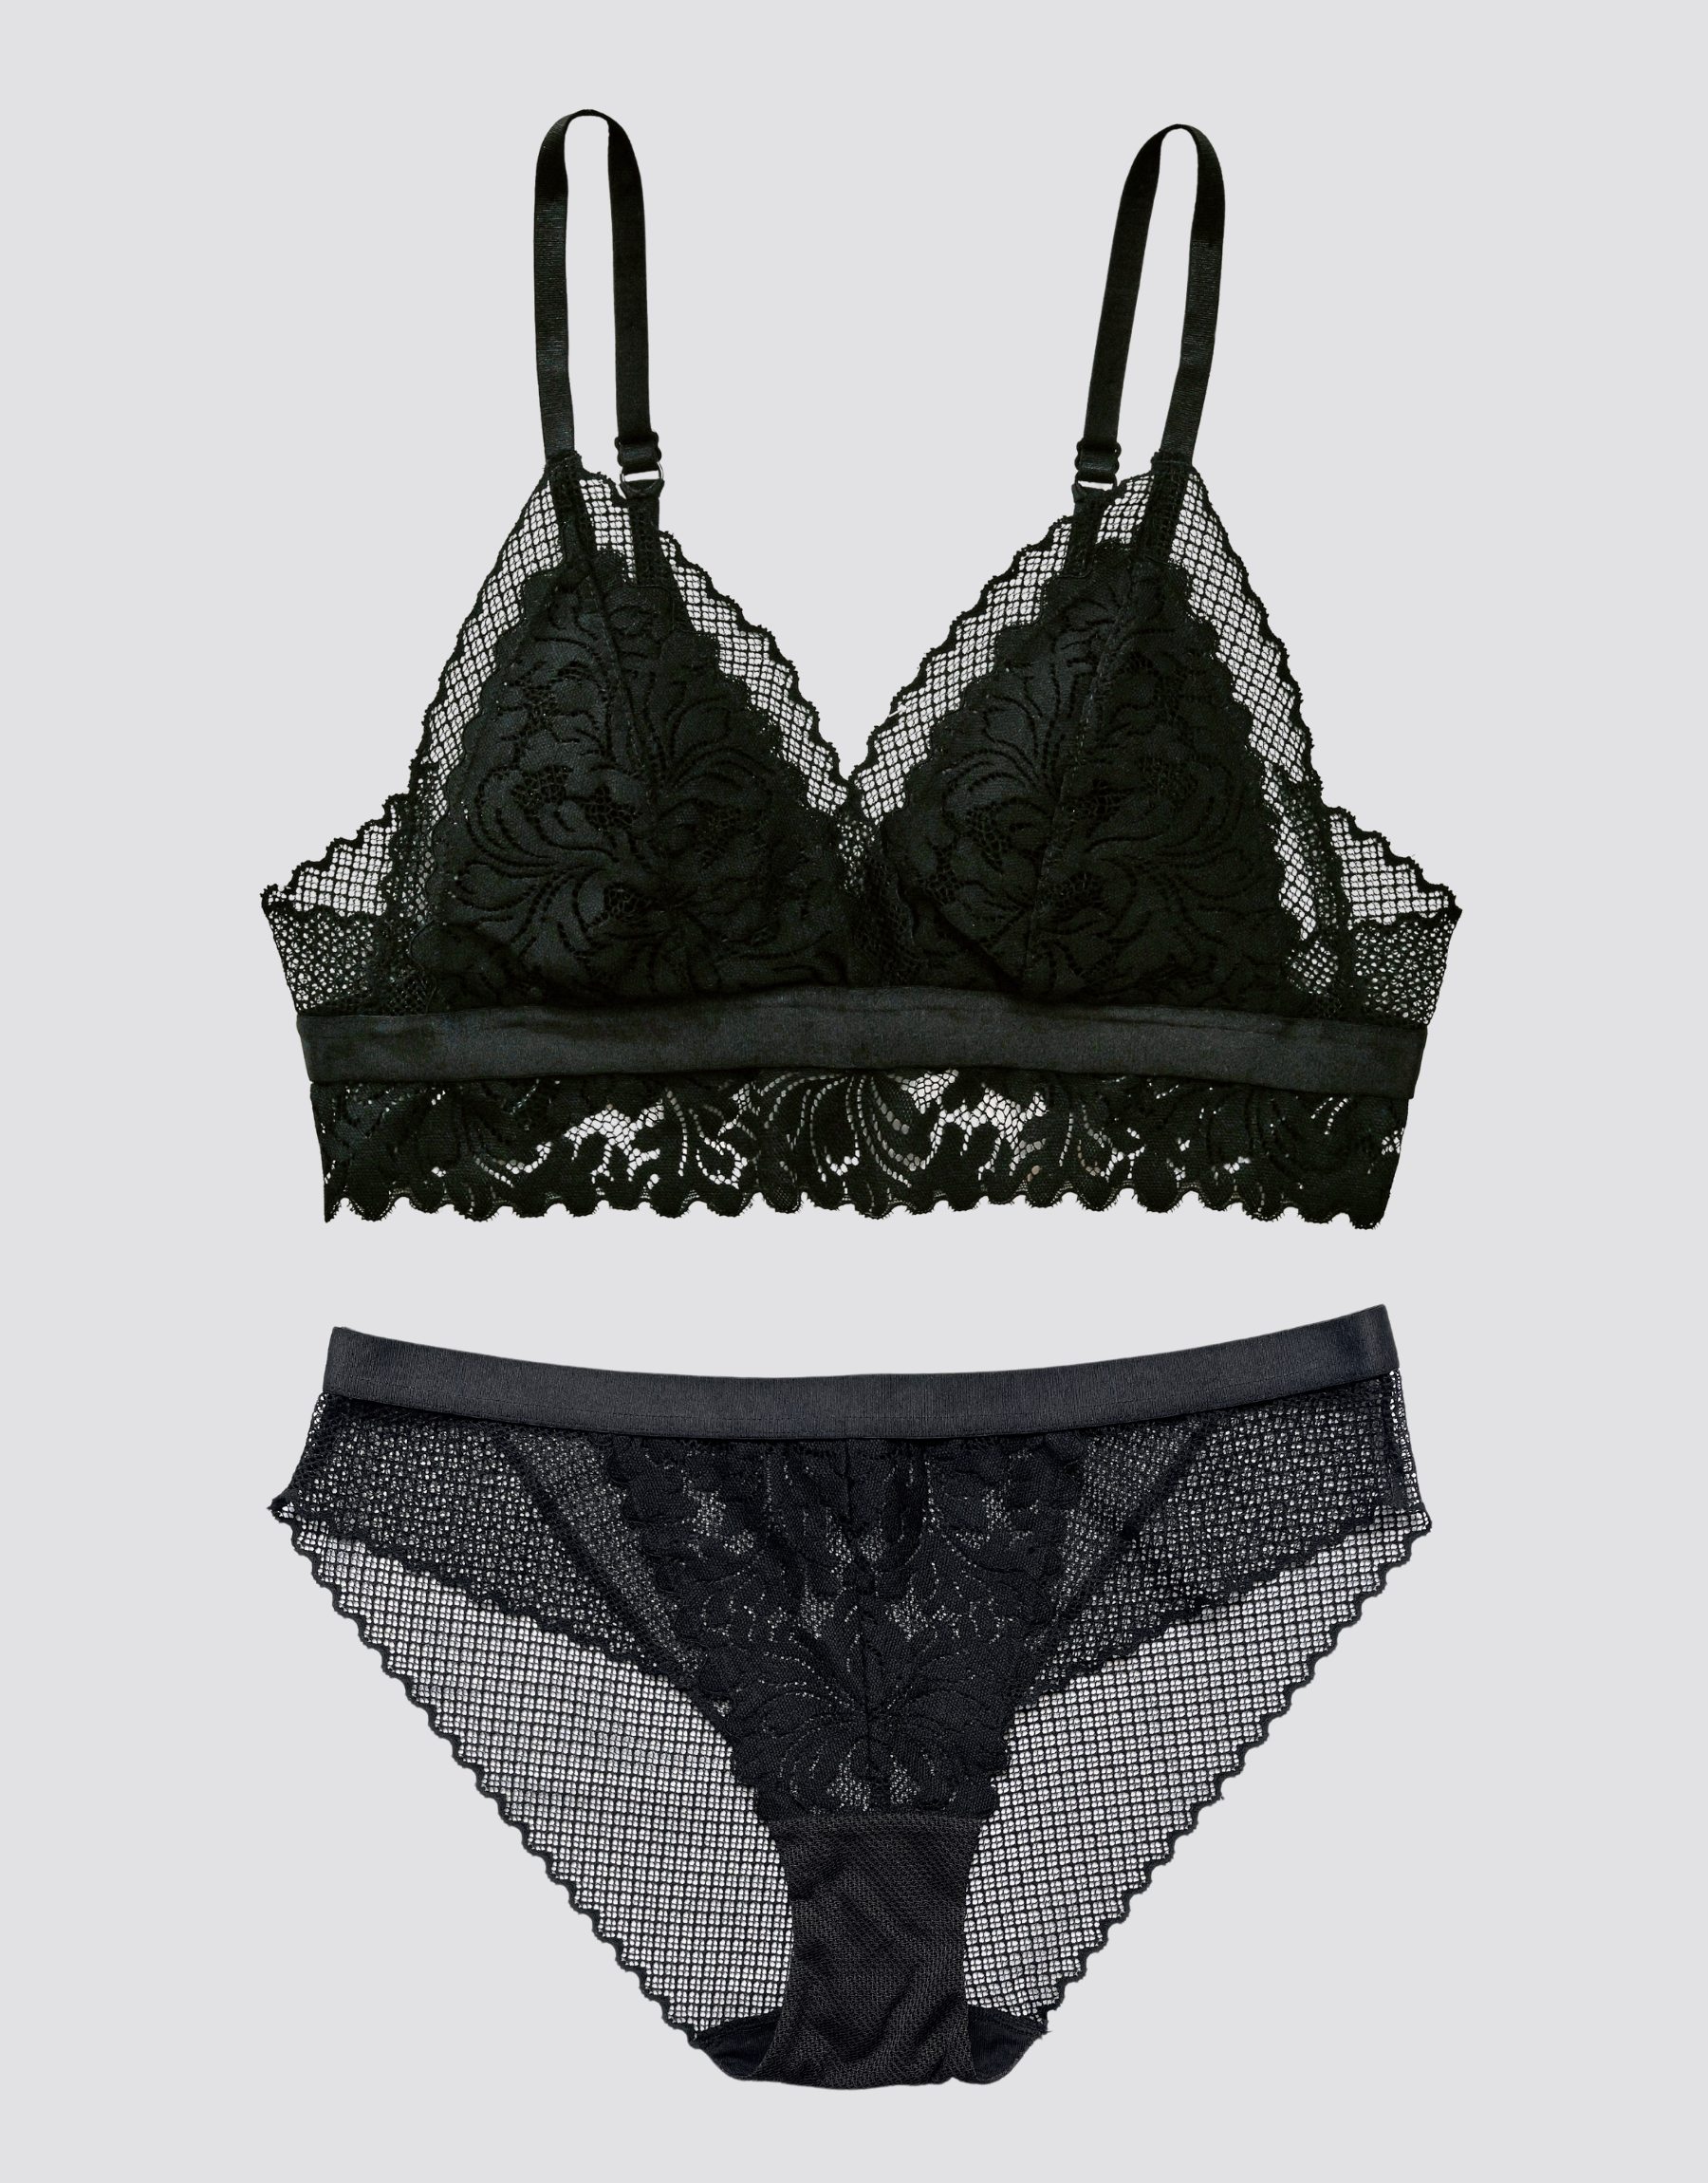 Valentines Black Lace Super Soft Eyelash-Lace Bralette With Giftwrapping  Add The Thong To Make A Beautiful Set by Belle-et-BonBon